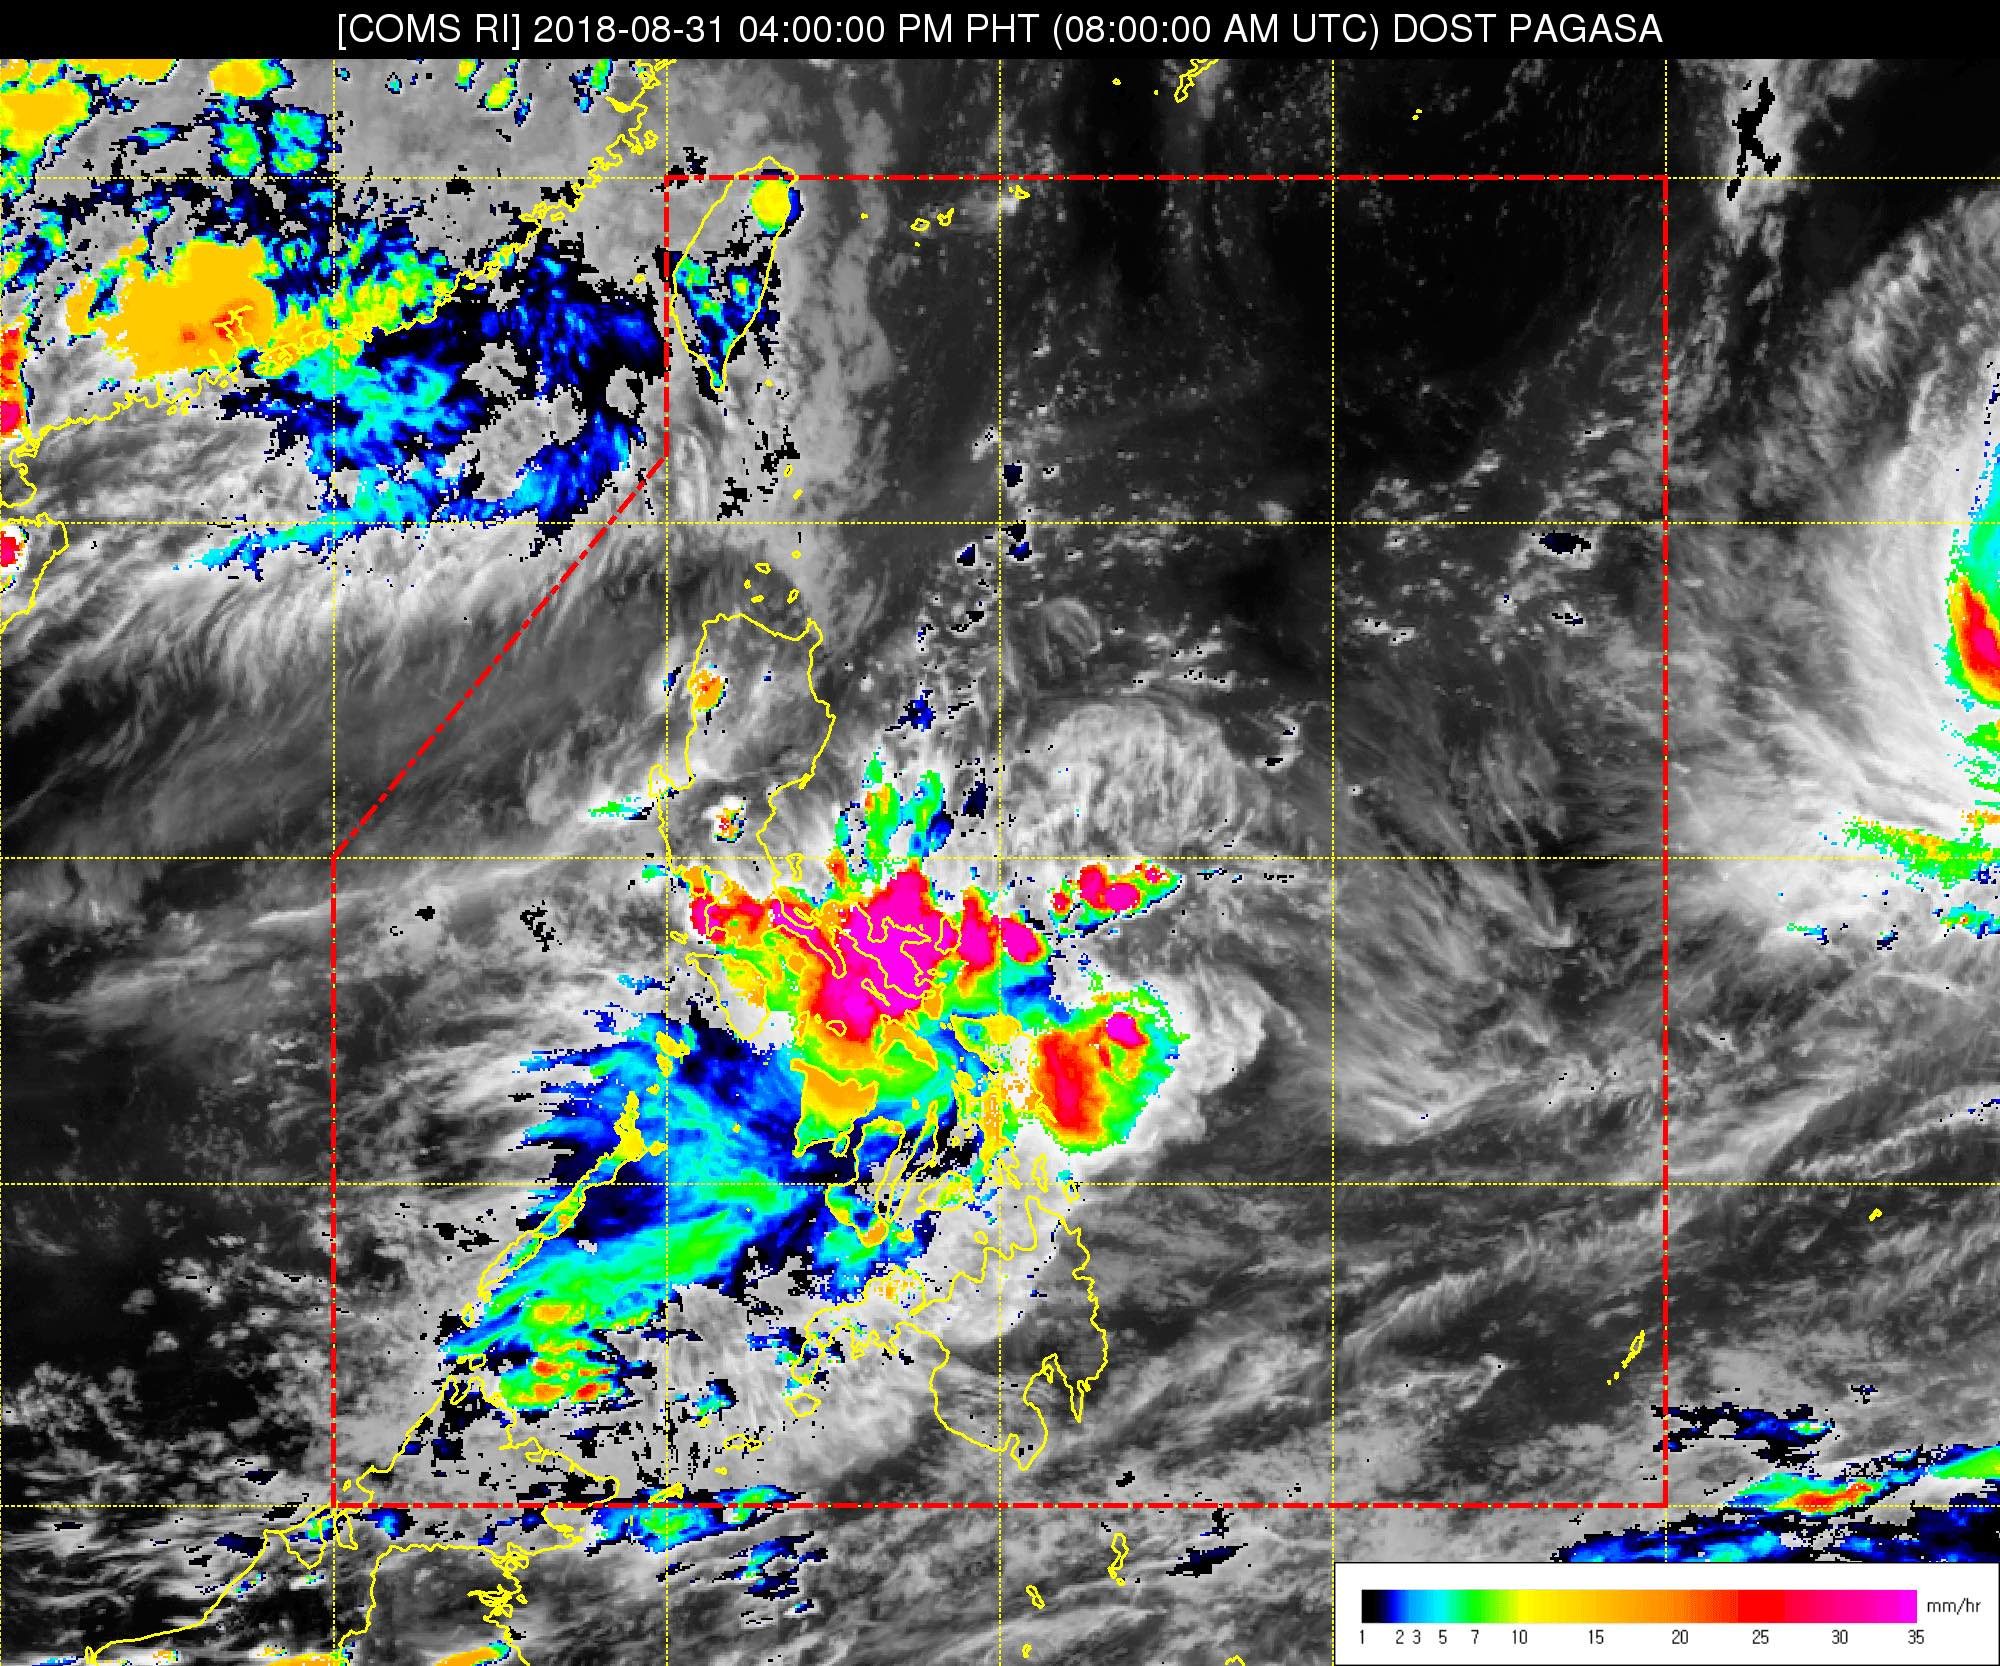 Rainy September 1 in parts of PH due to LPA